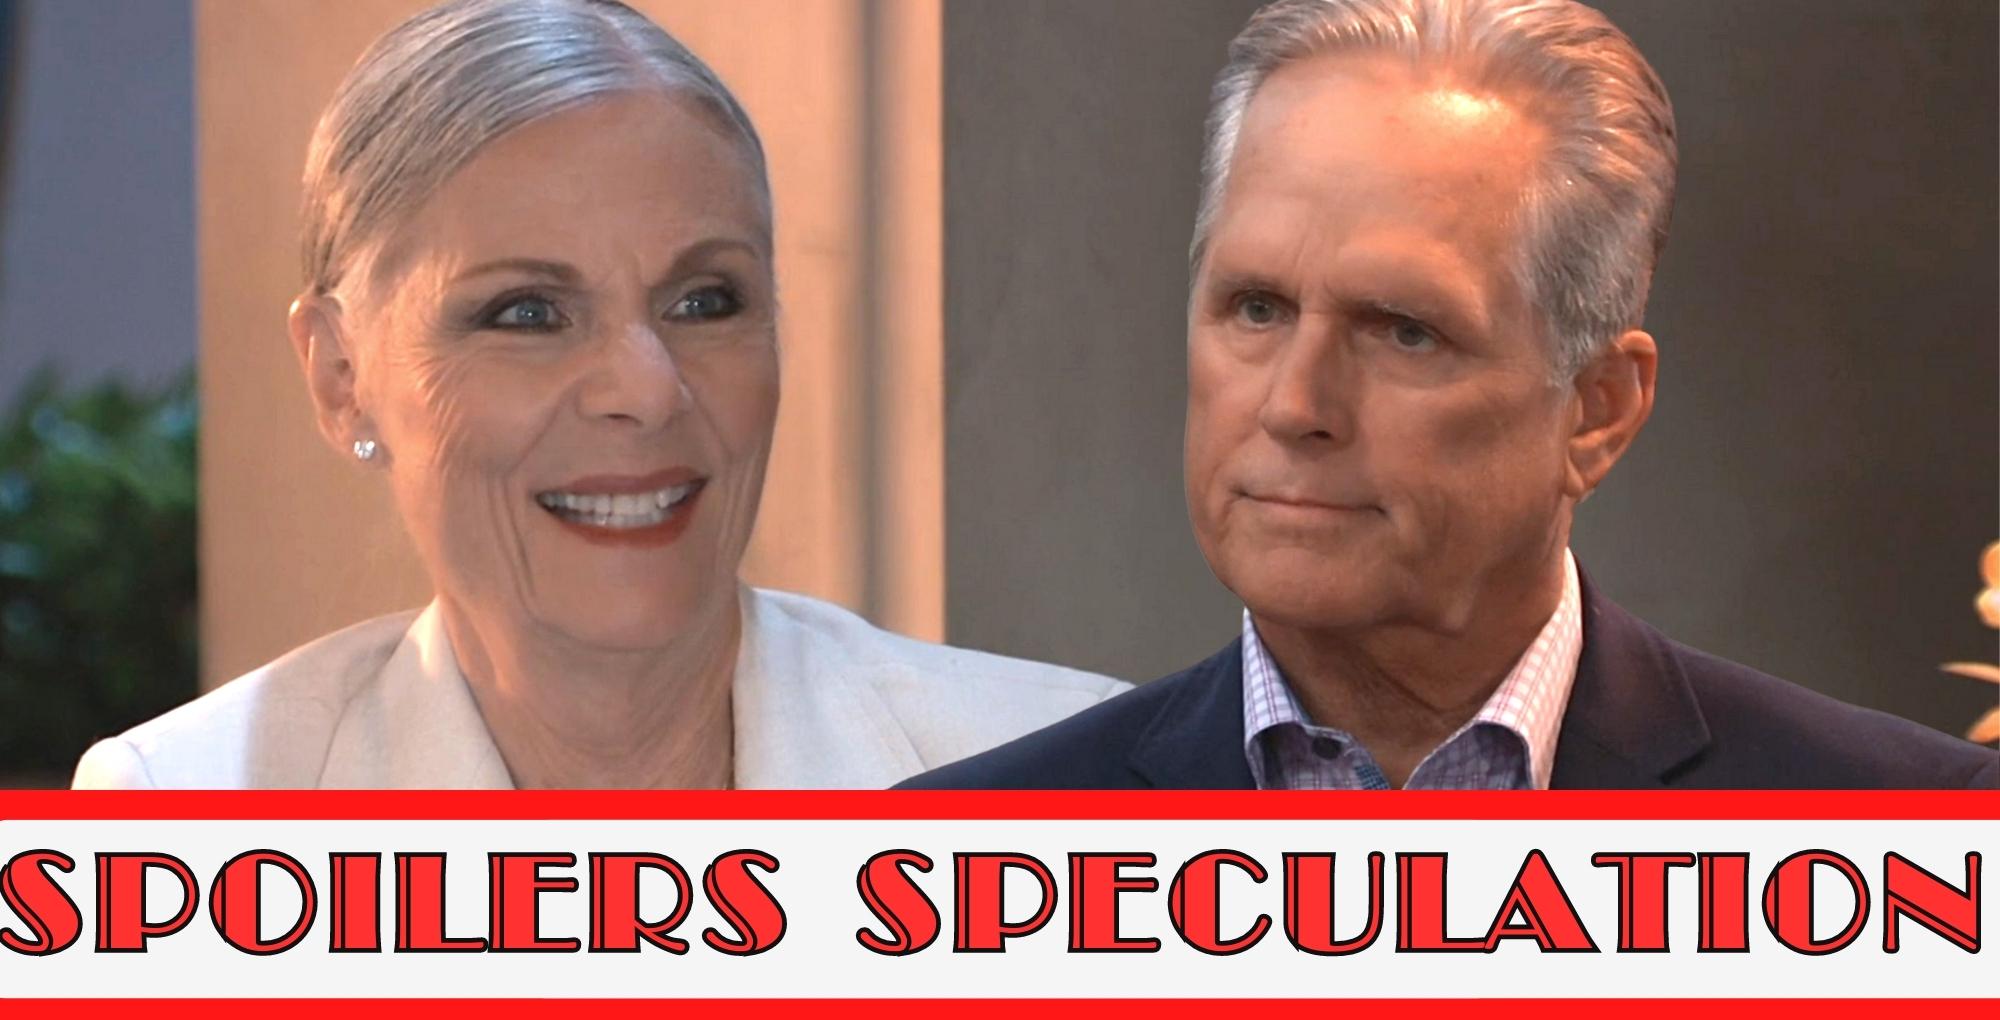 gh spoilers speculation for tracy and gregory in a romance.